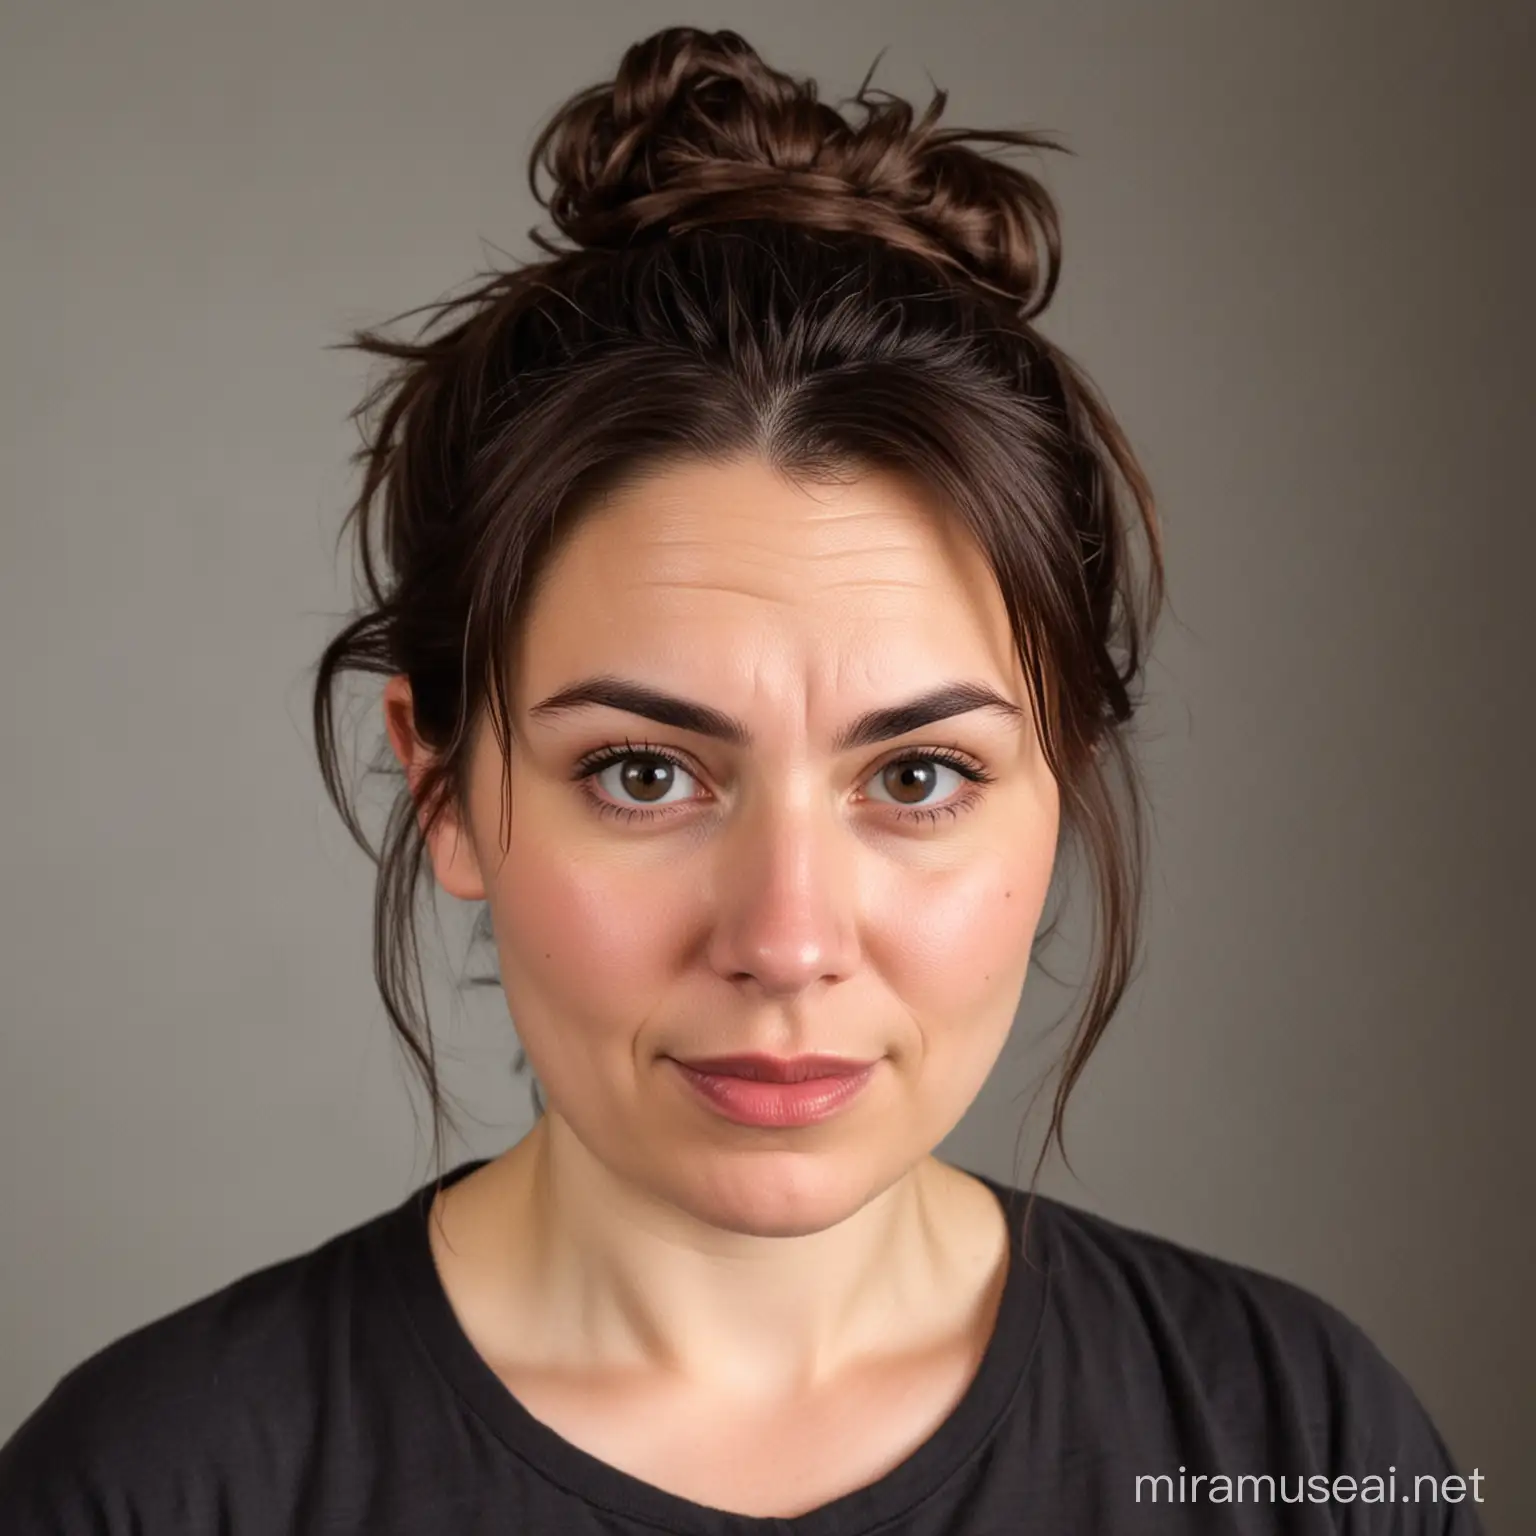 middle age technical theater teacher, pale woman, dark brown hair in messy bun, round face, chubby
